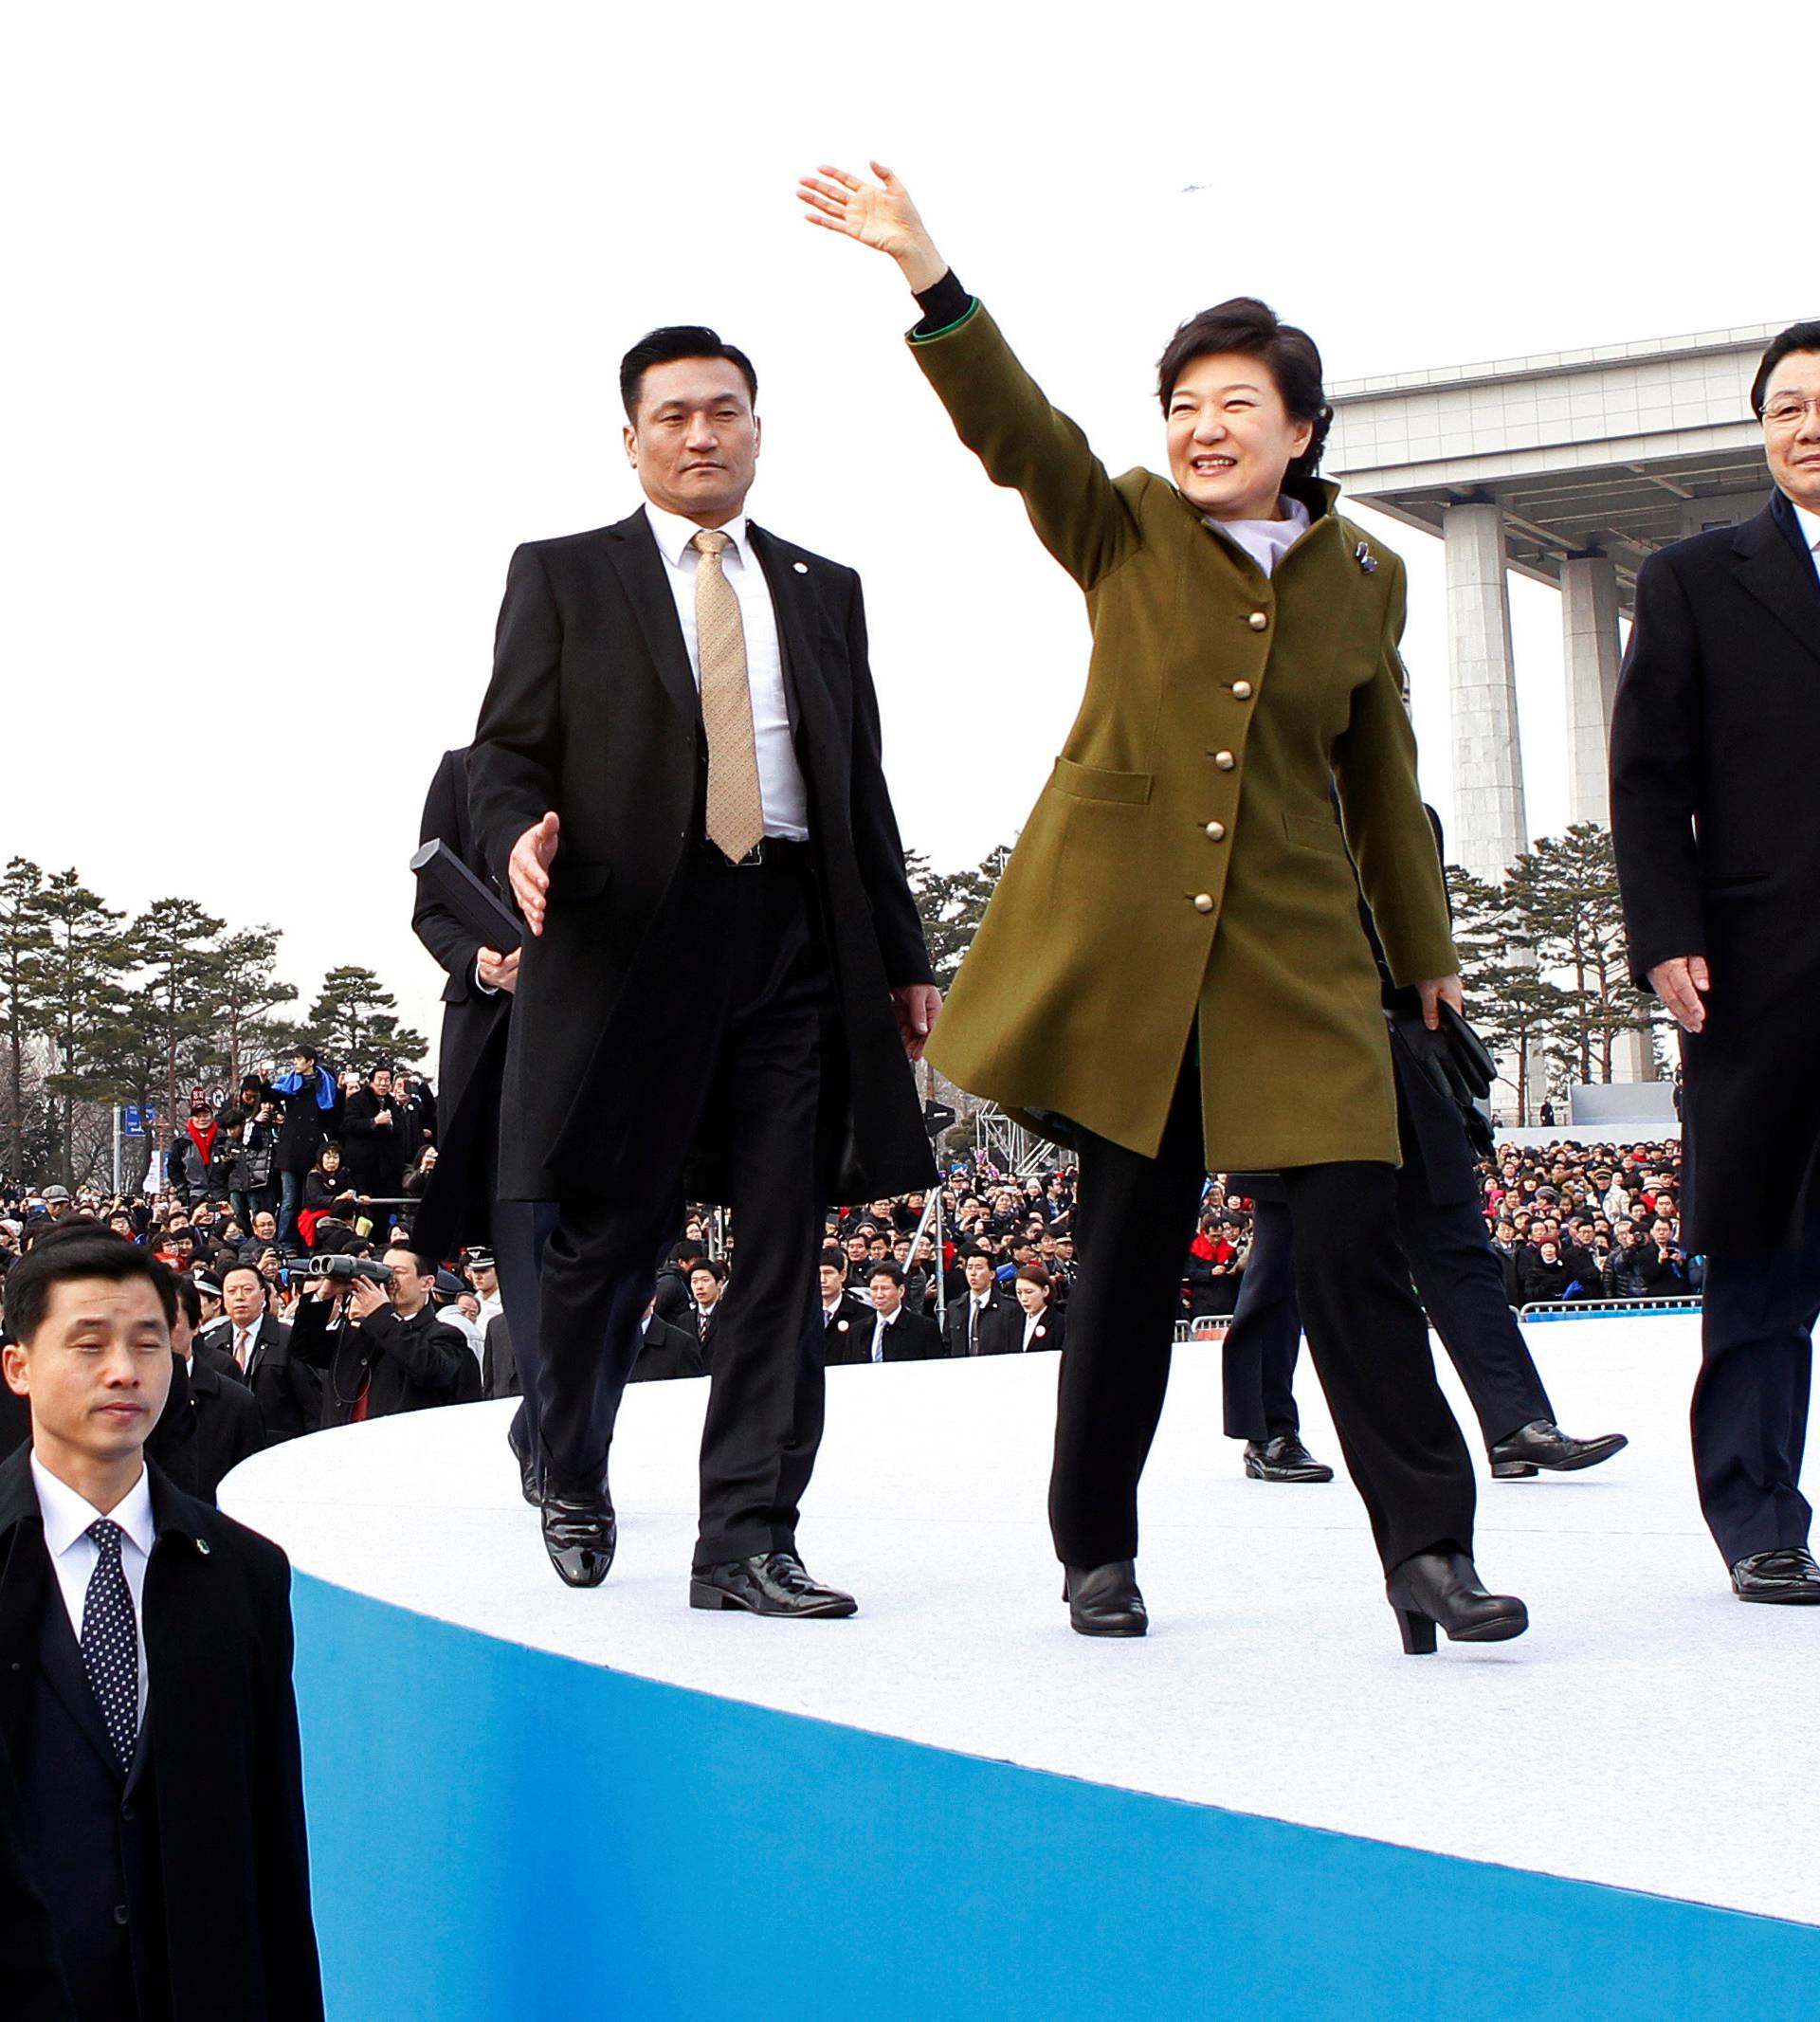 South Korea's new President Park Geun-hye leaves after her inauguration at the parliament in Seoul